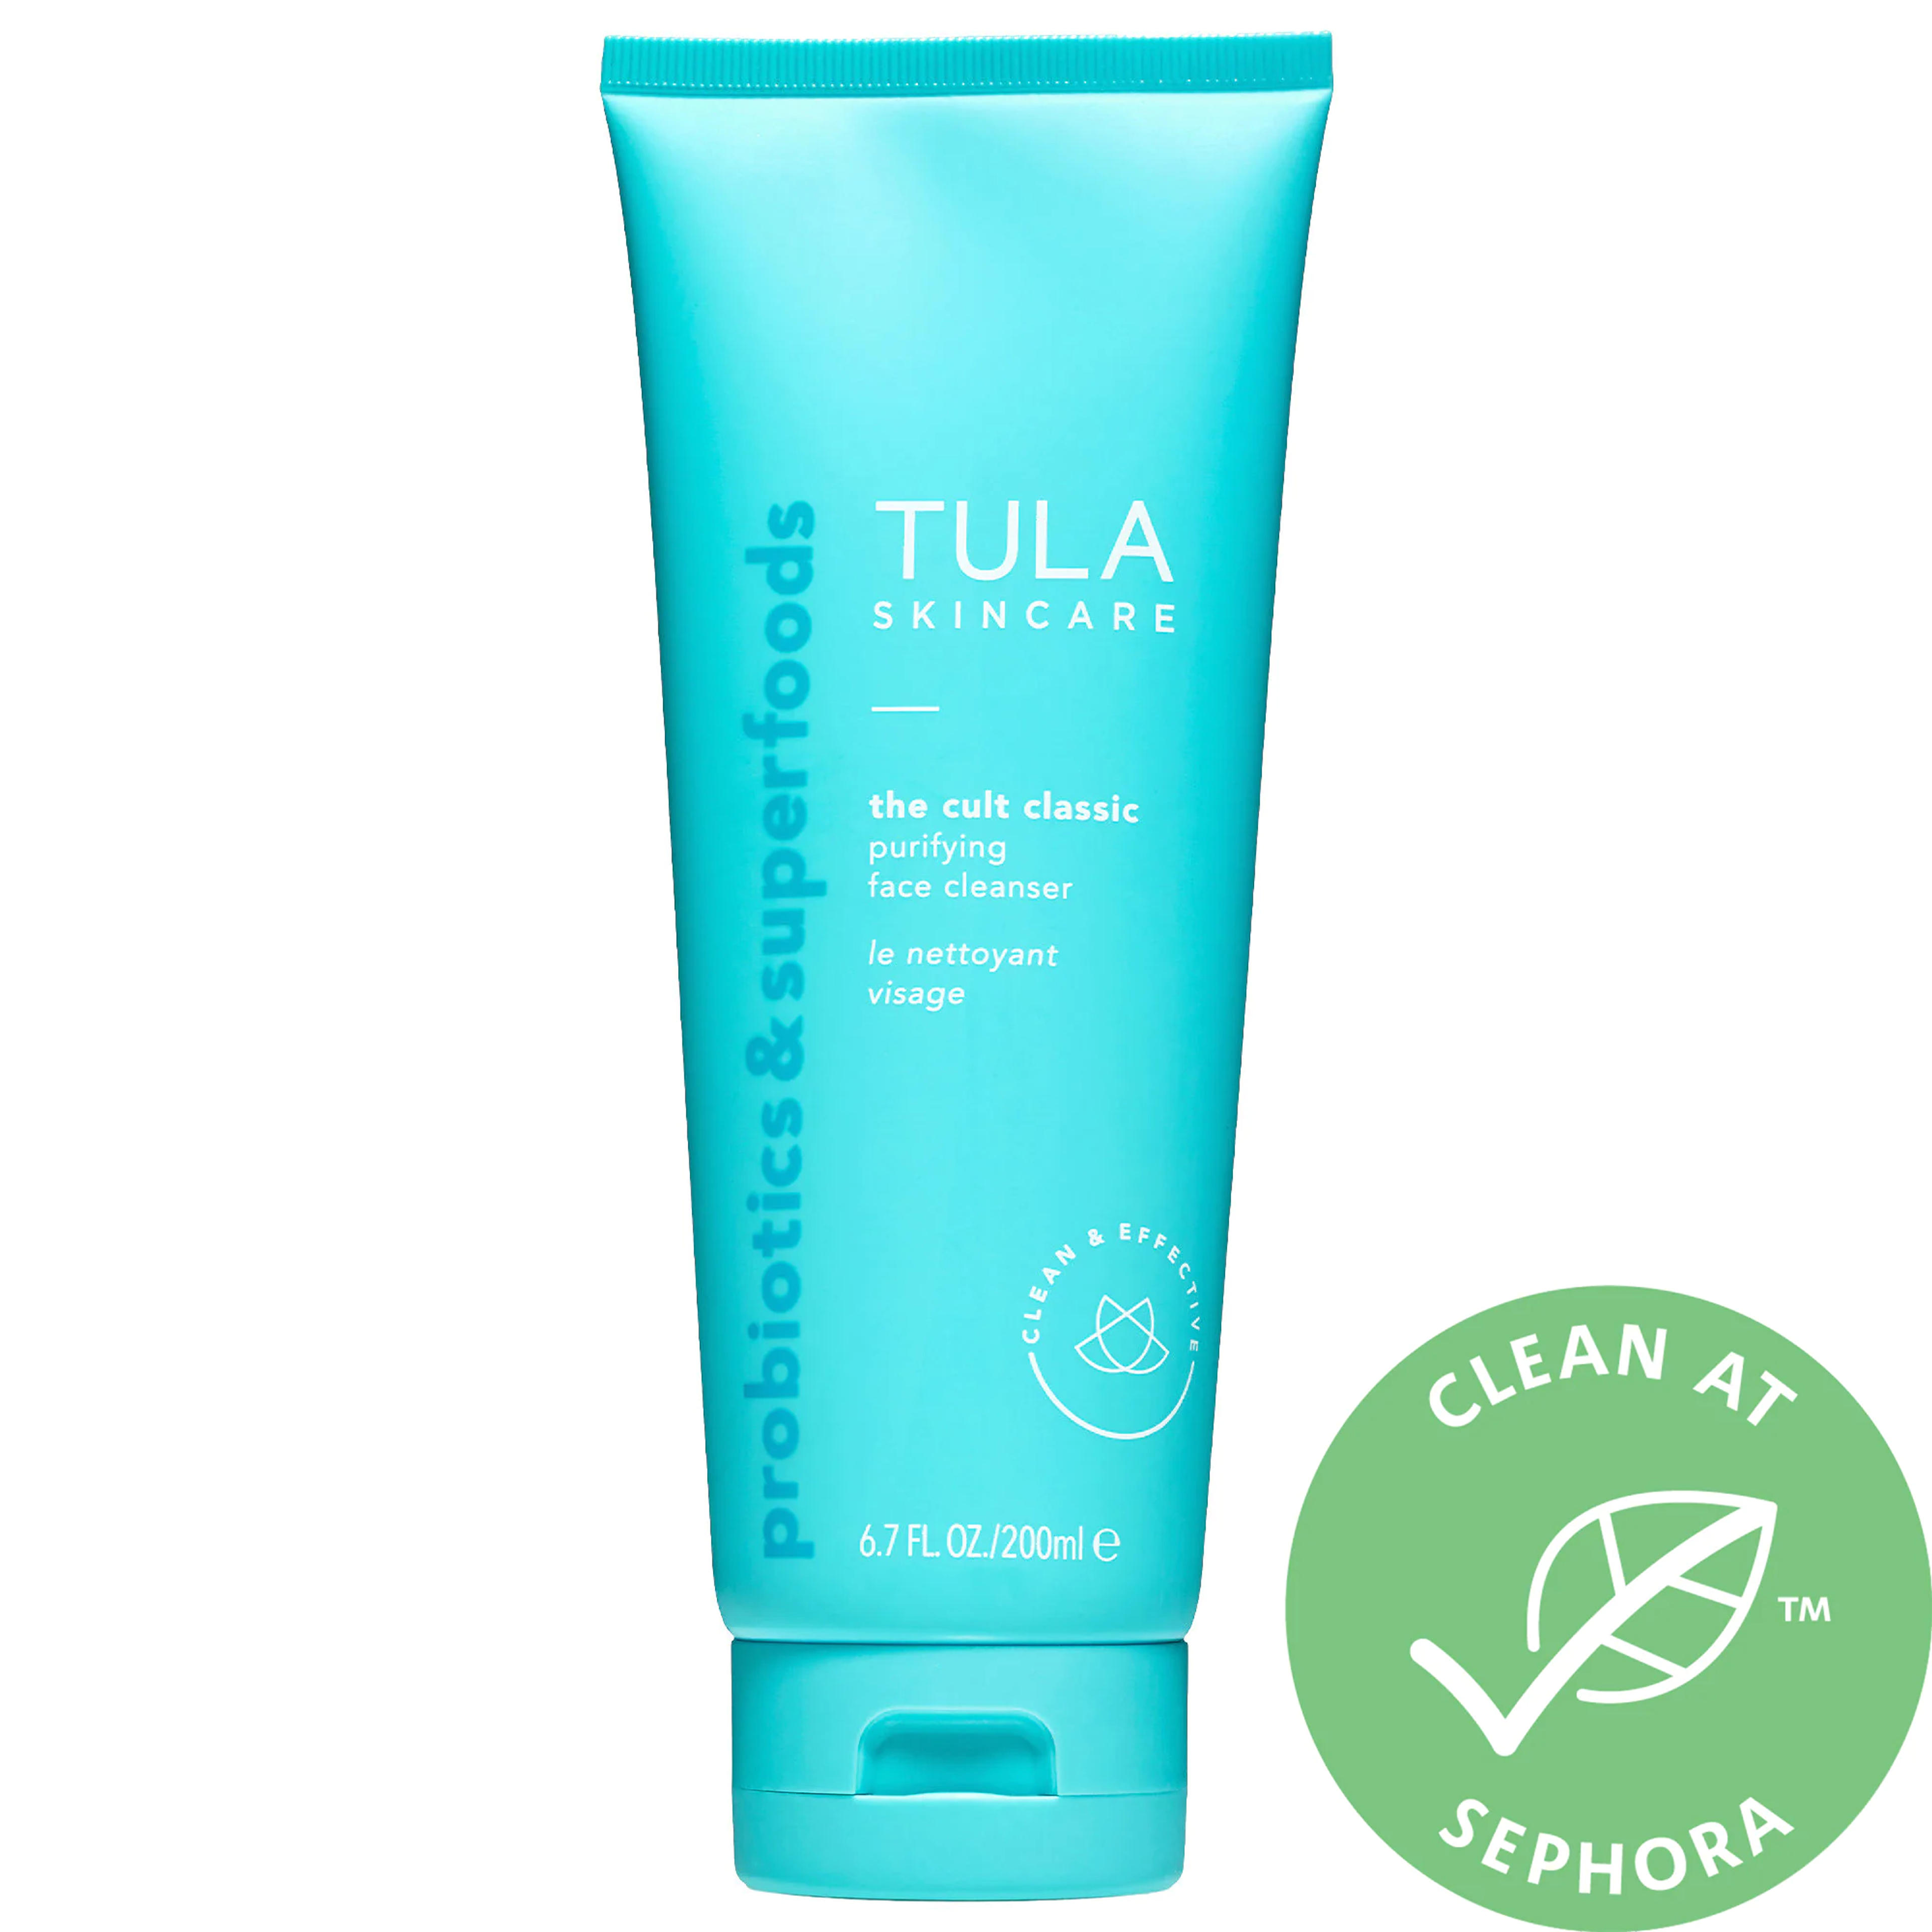 The Cult Classic Purifying Face Cleanser - TULA Skincare